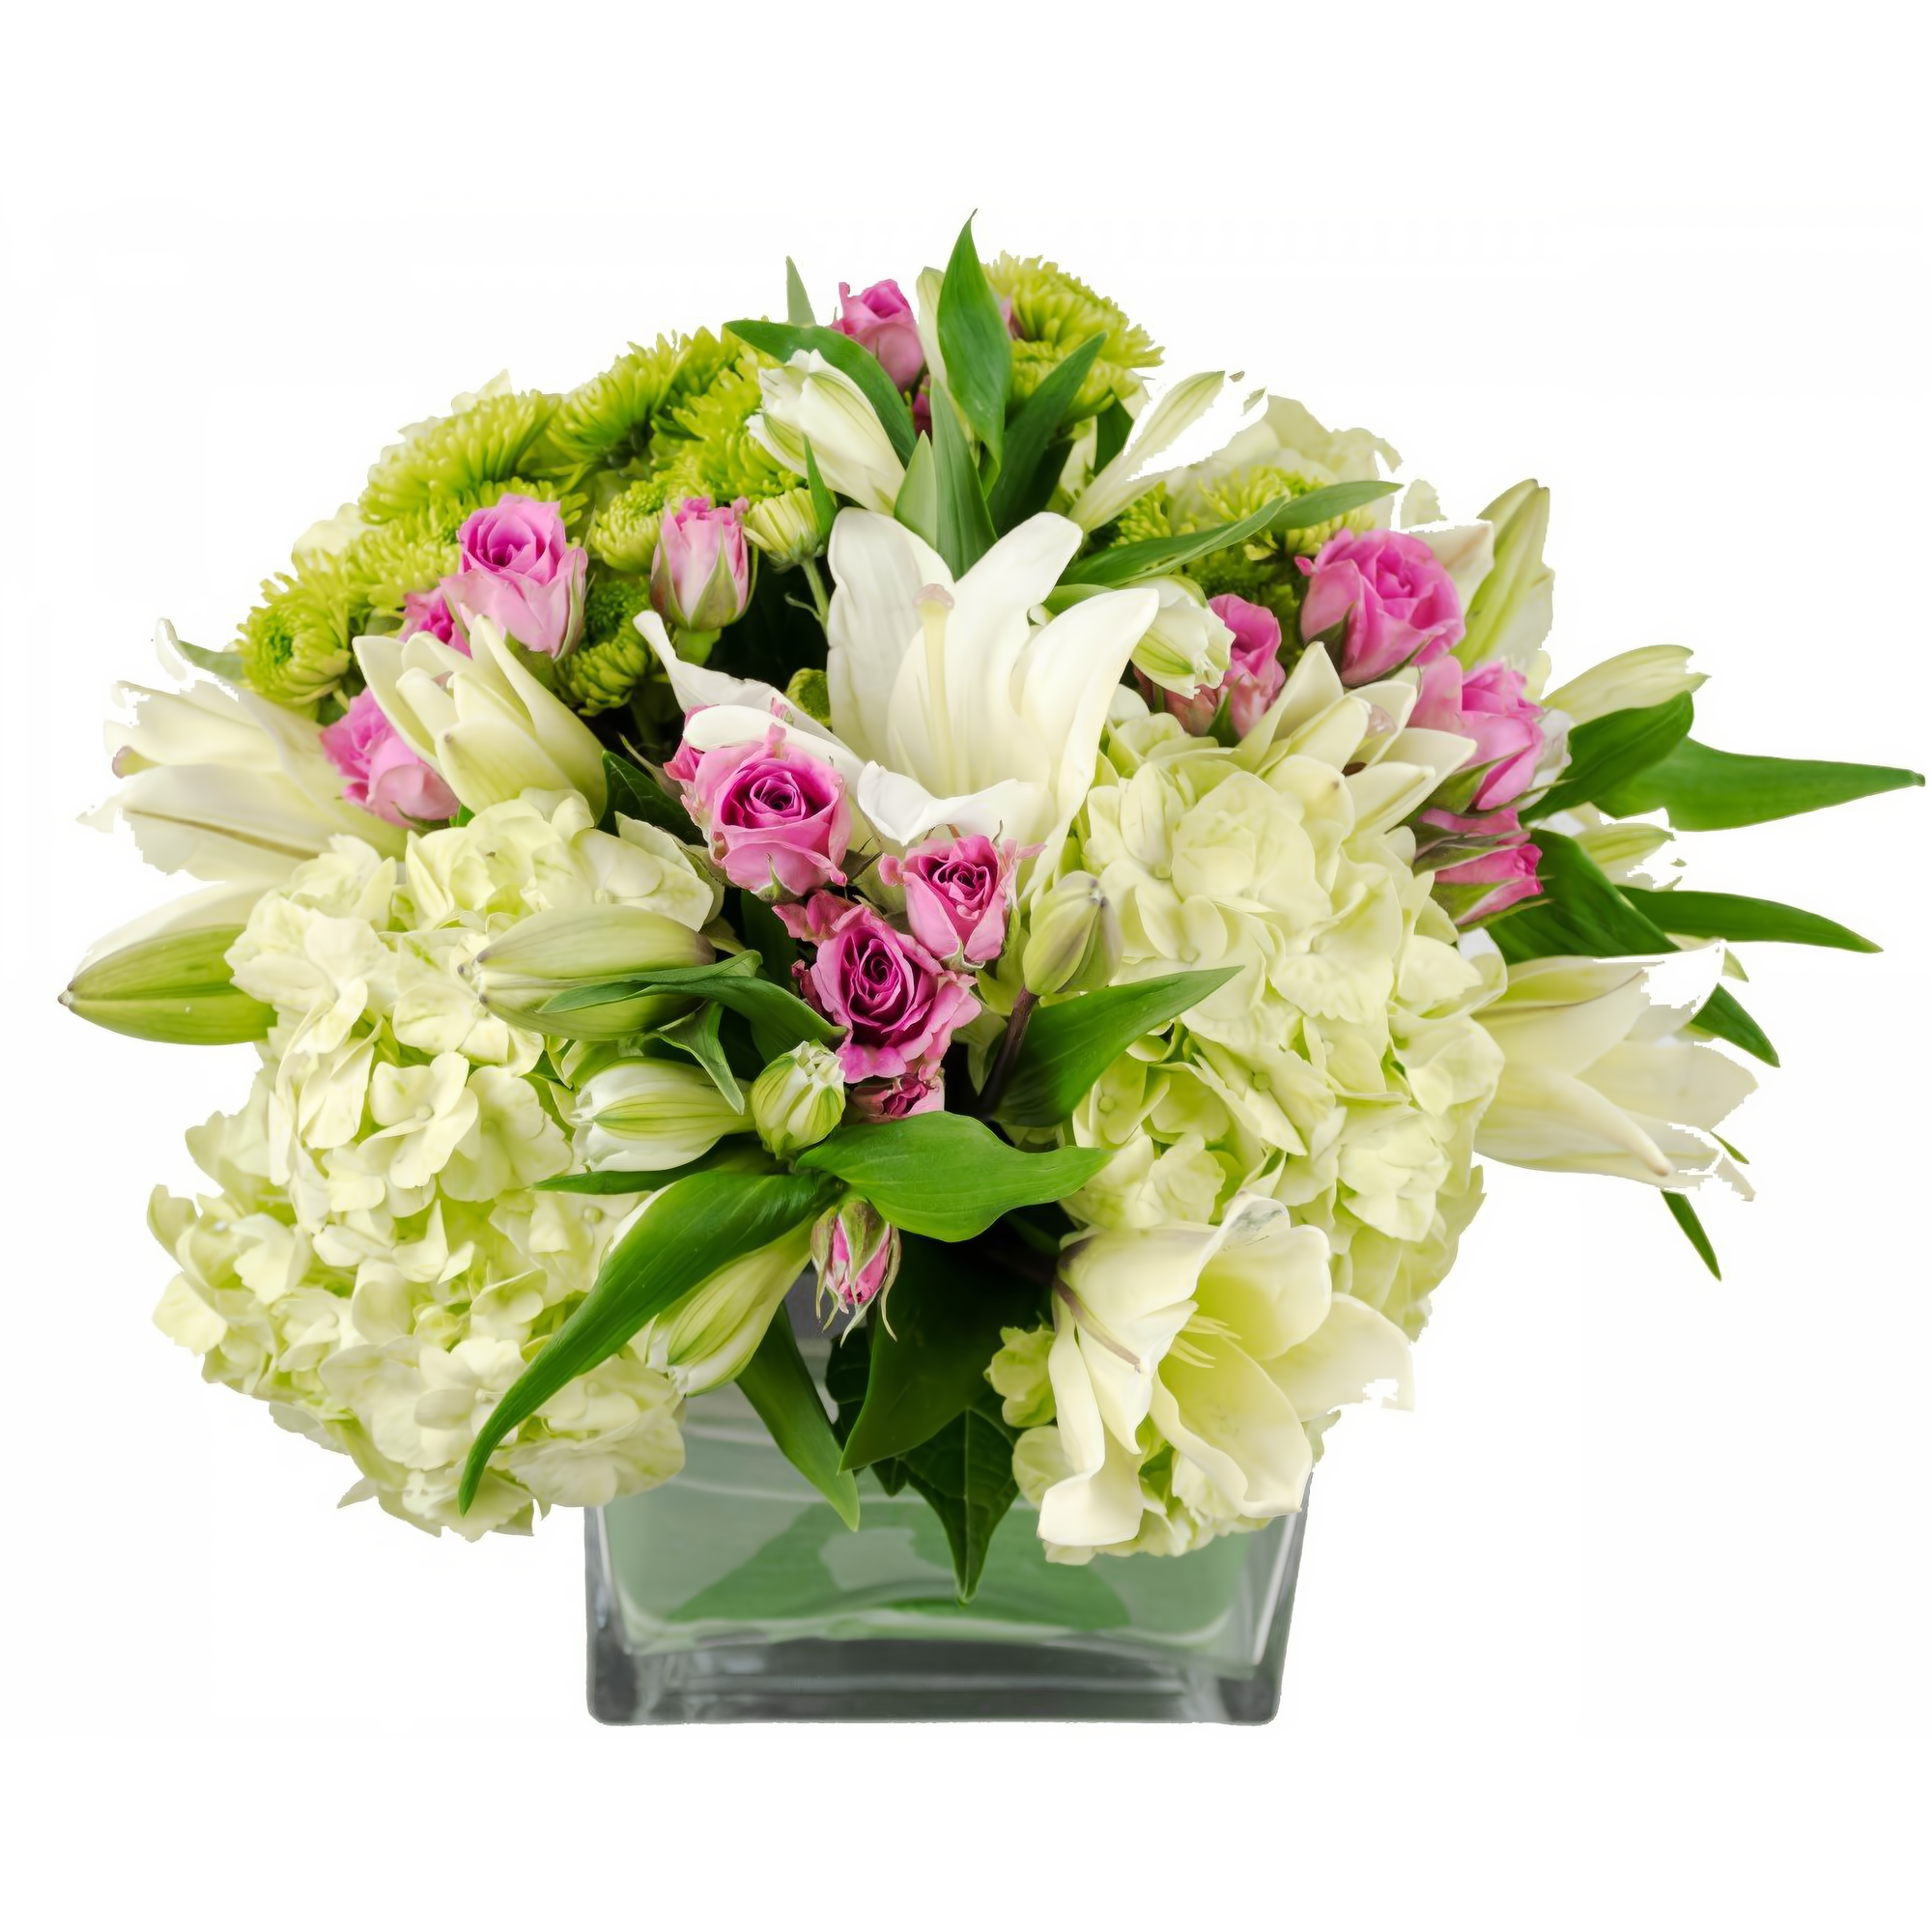 Manhattan Flower Delivery - Magnificent Madison - Occasions > Anniversary